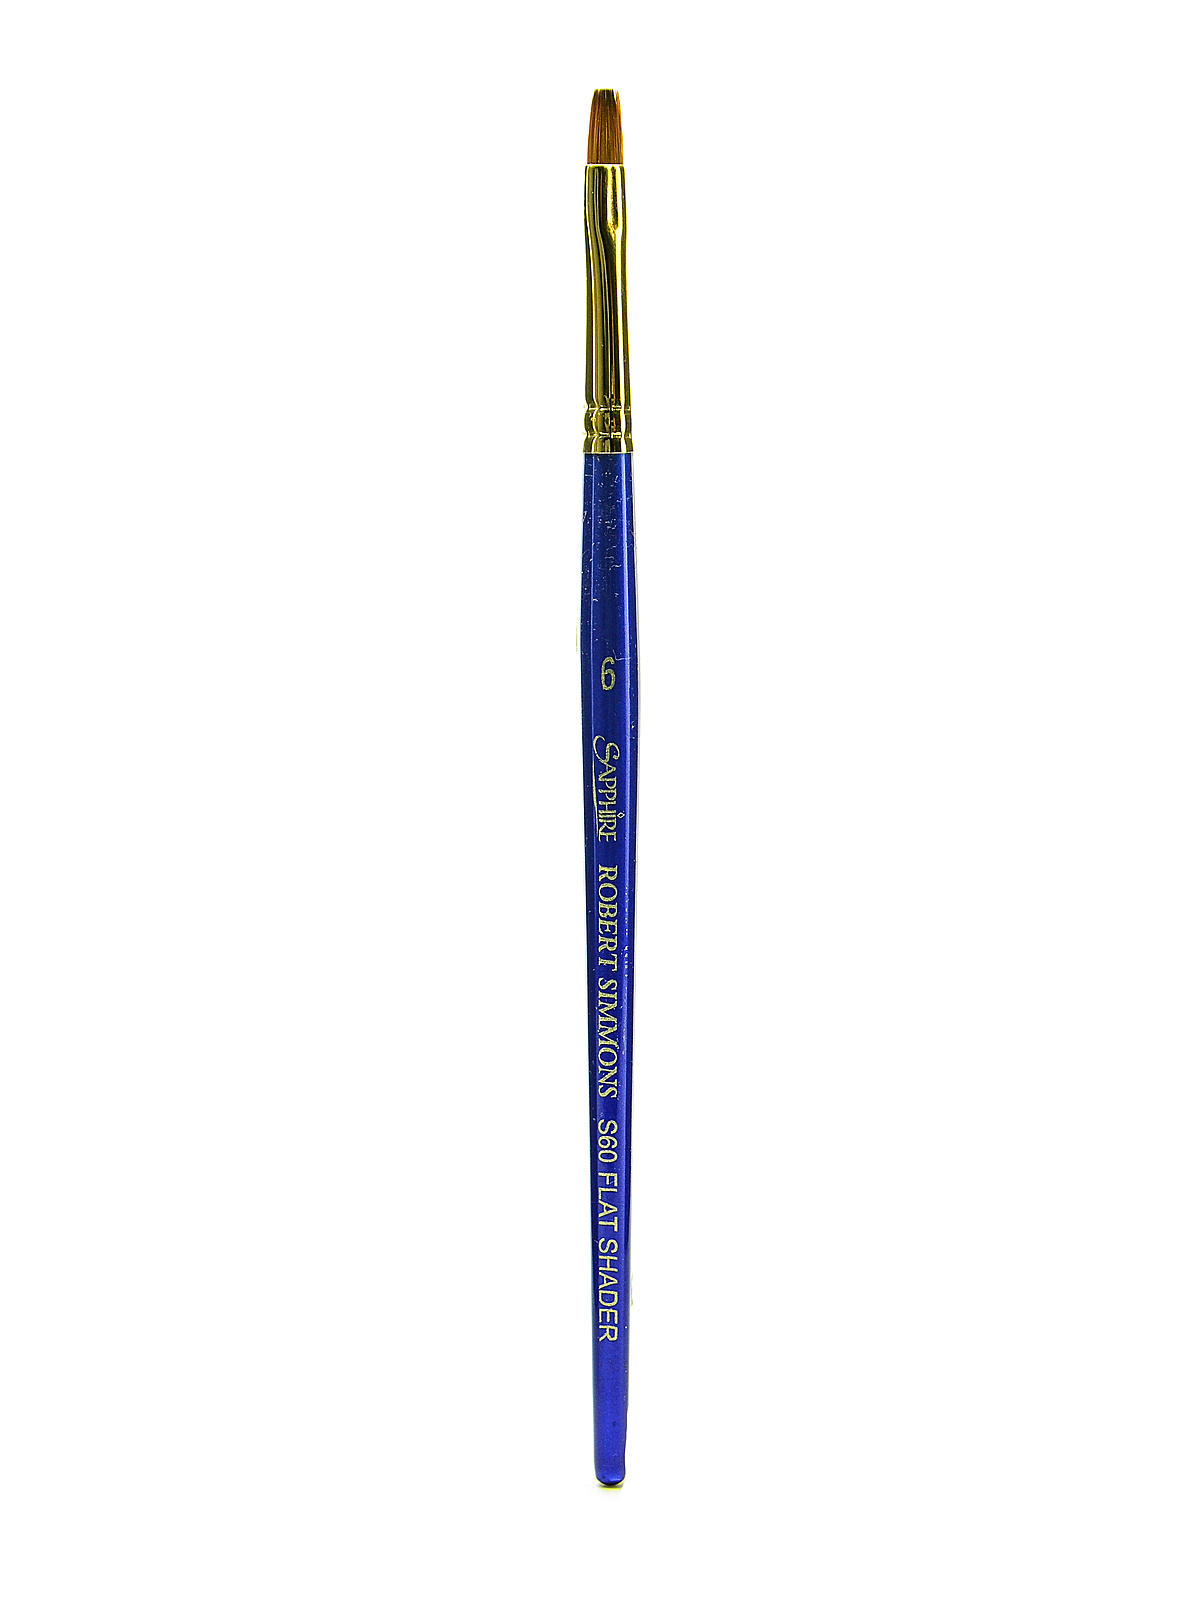 Sapphire Series Synthetic Brushes Short Handle 6 Shader S60